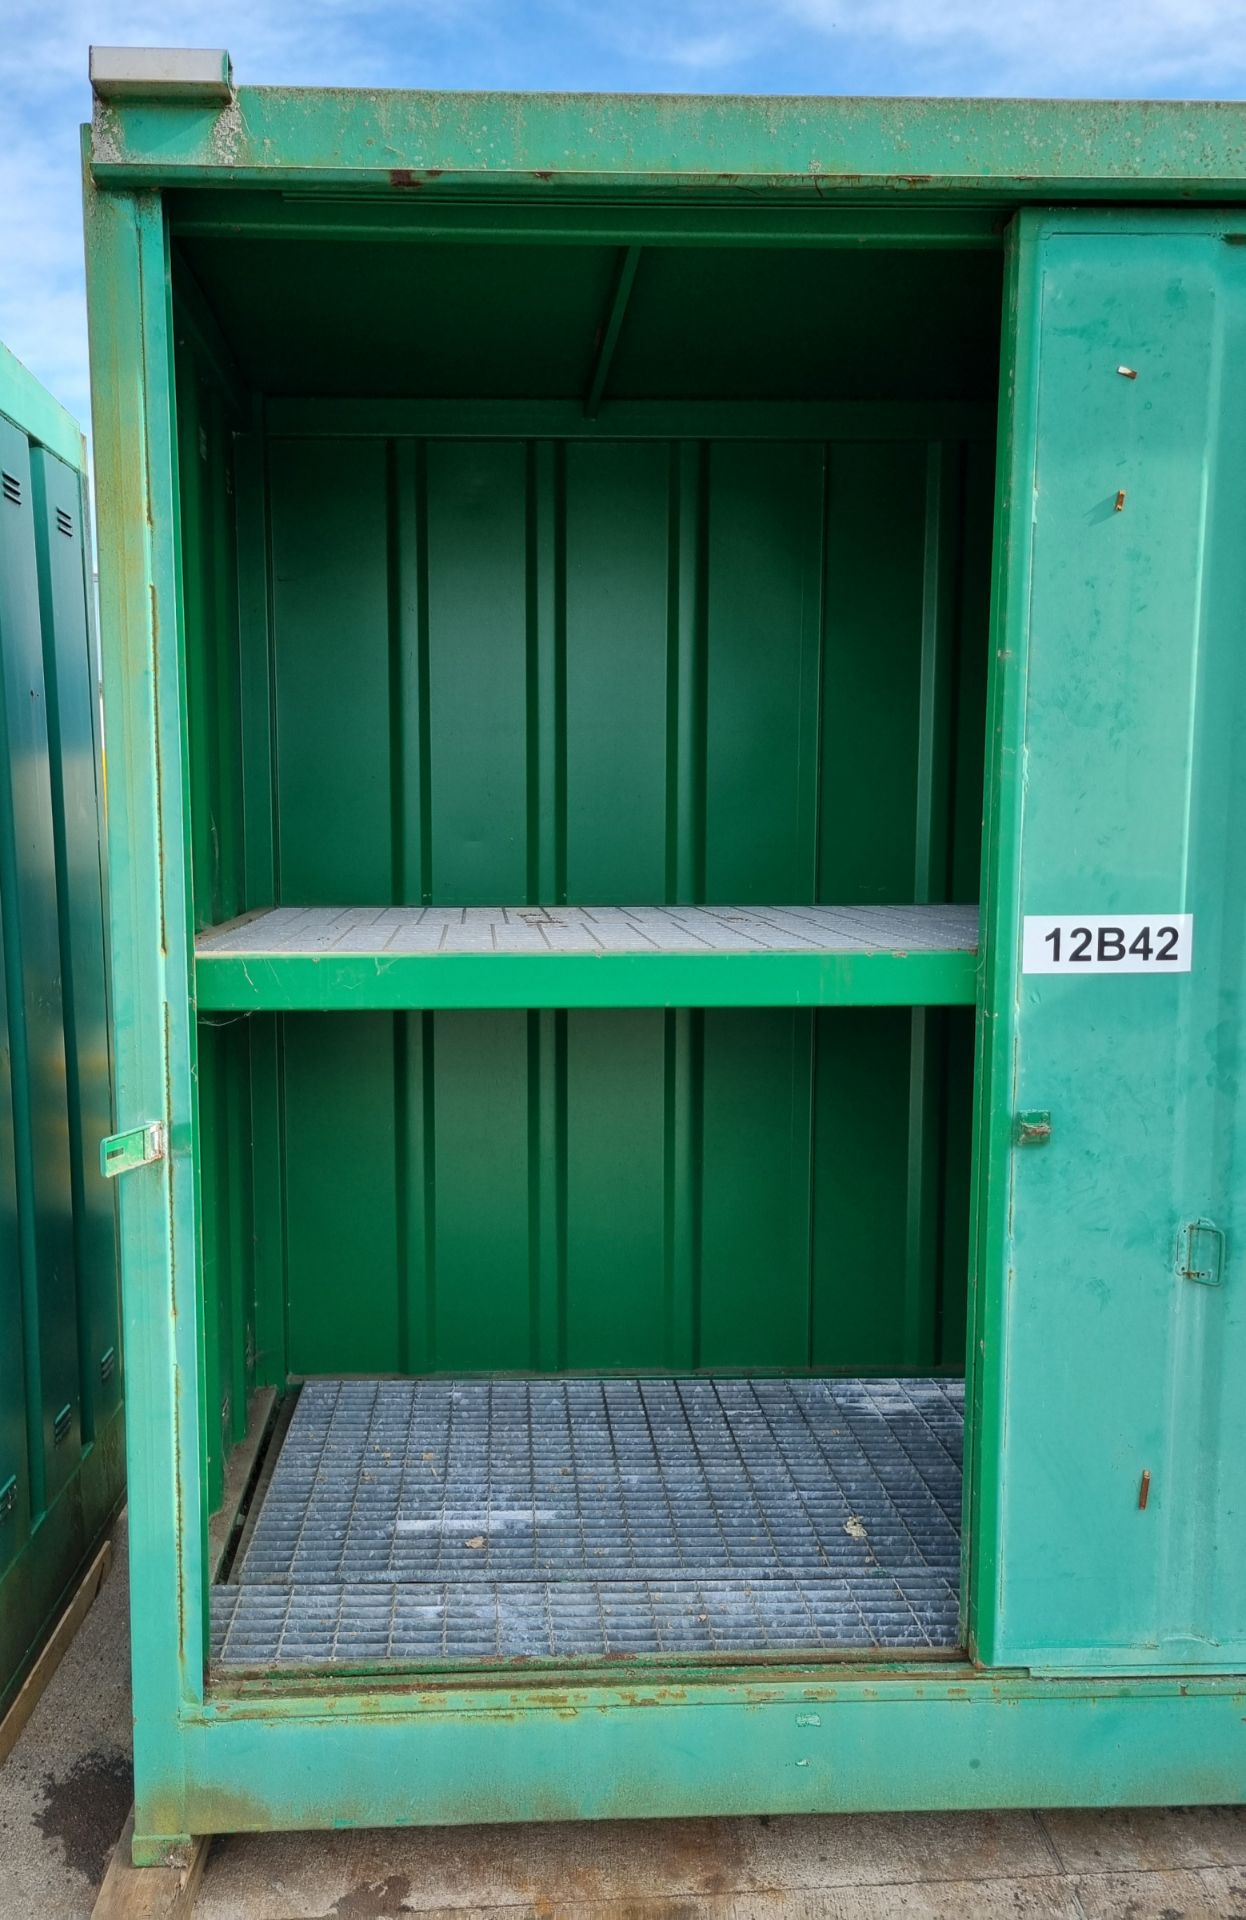 Empteezy ICB storage container - green - W 3050 x D 1500 x H 3000mm - Image 5 of 10